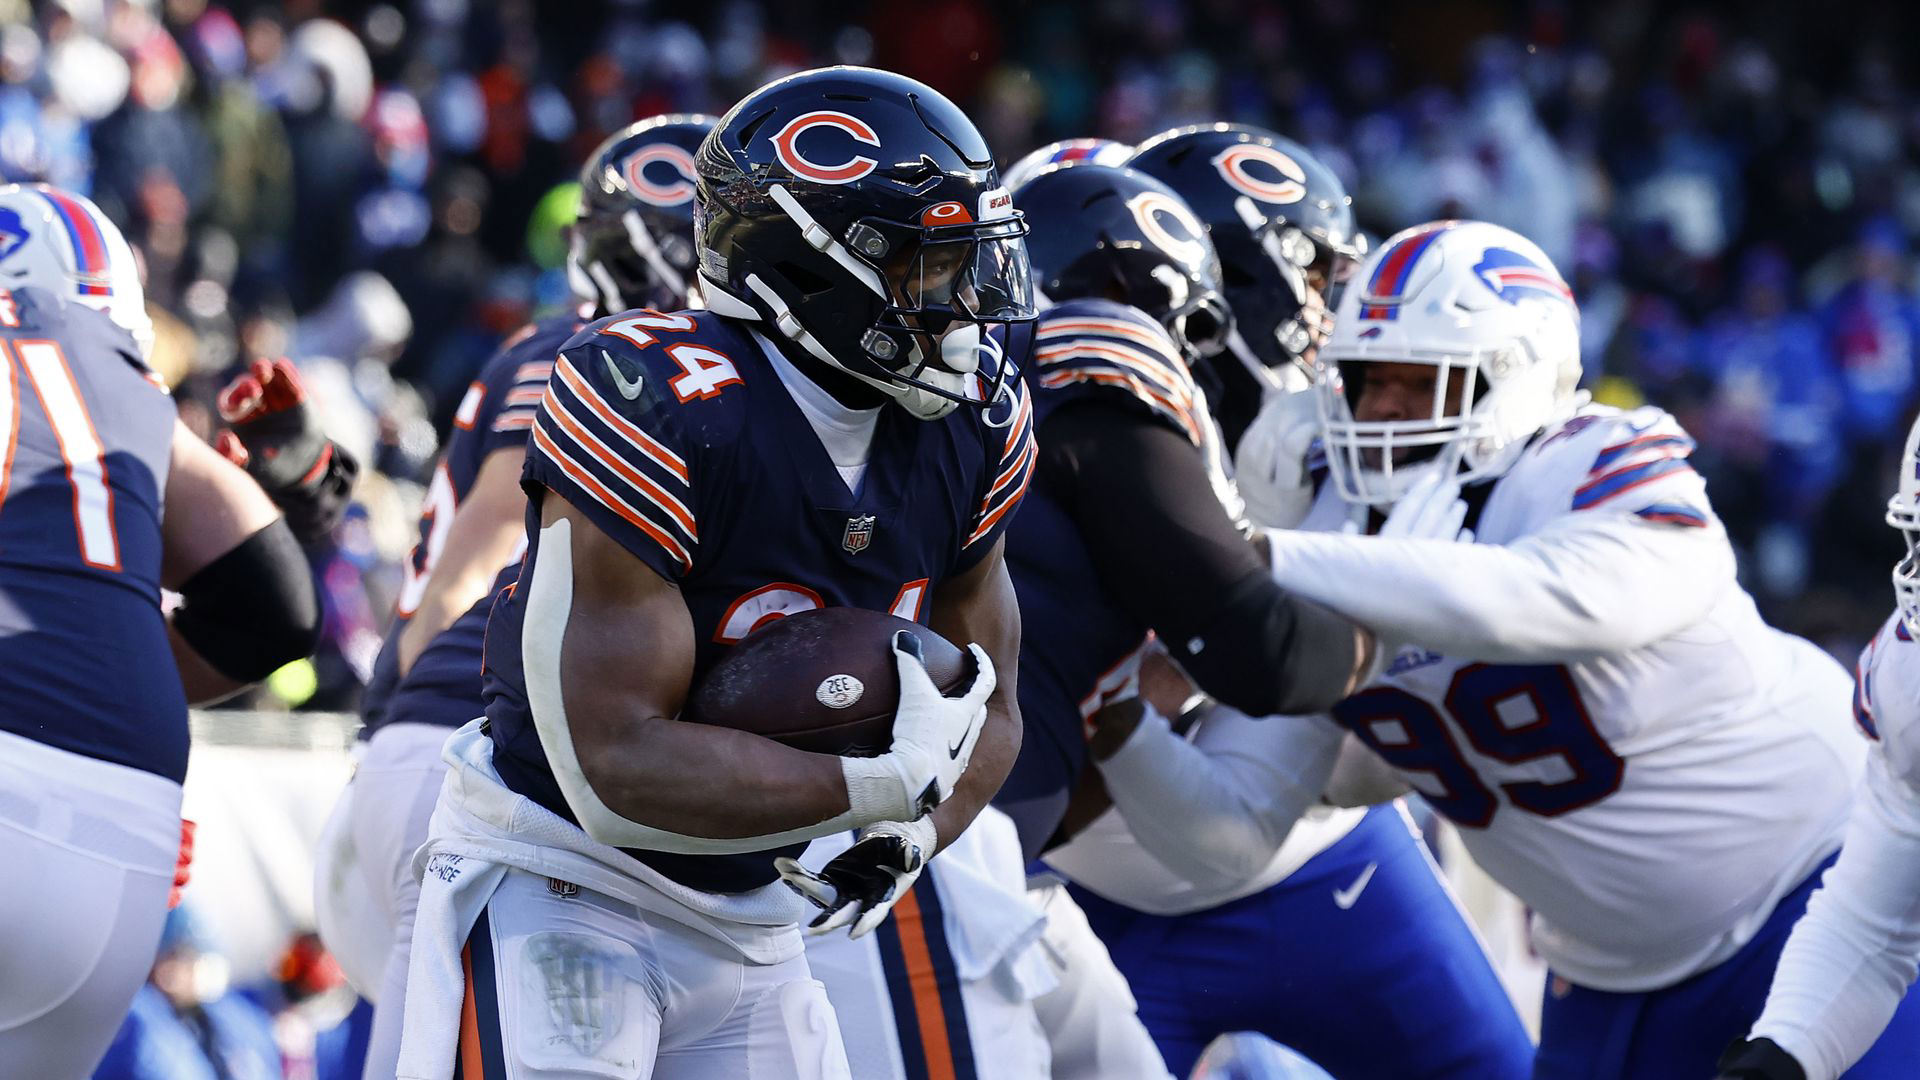 How to Watch the Bears vs Bills preseason game, previews, odds, and more